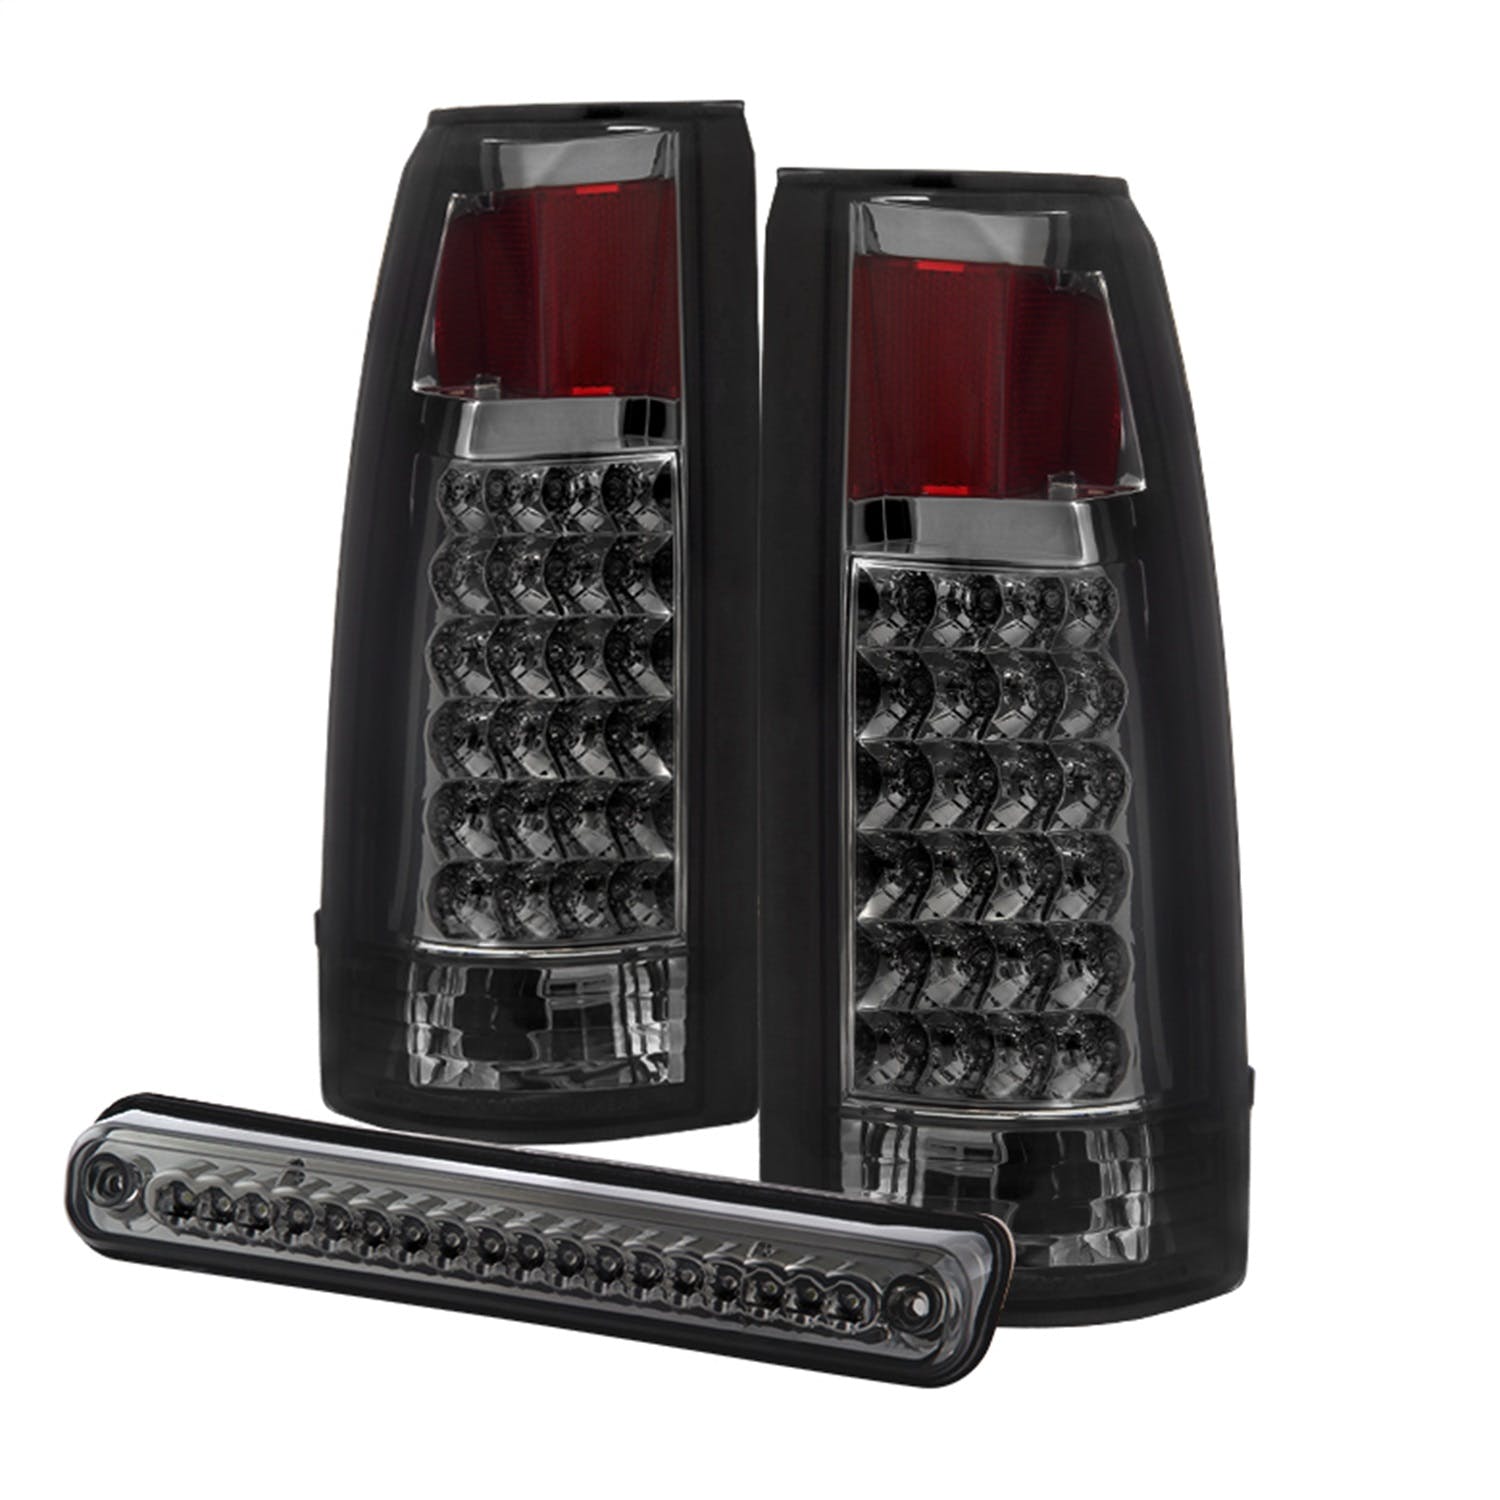 XTUNE POWER 9032752 Chevy C K Series 1500 2500 3500 88 98 GMC Sierra 88 98 LED Tail Lights with 3rd LED brake Light Smoked